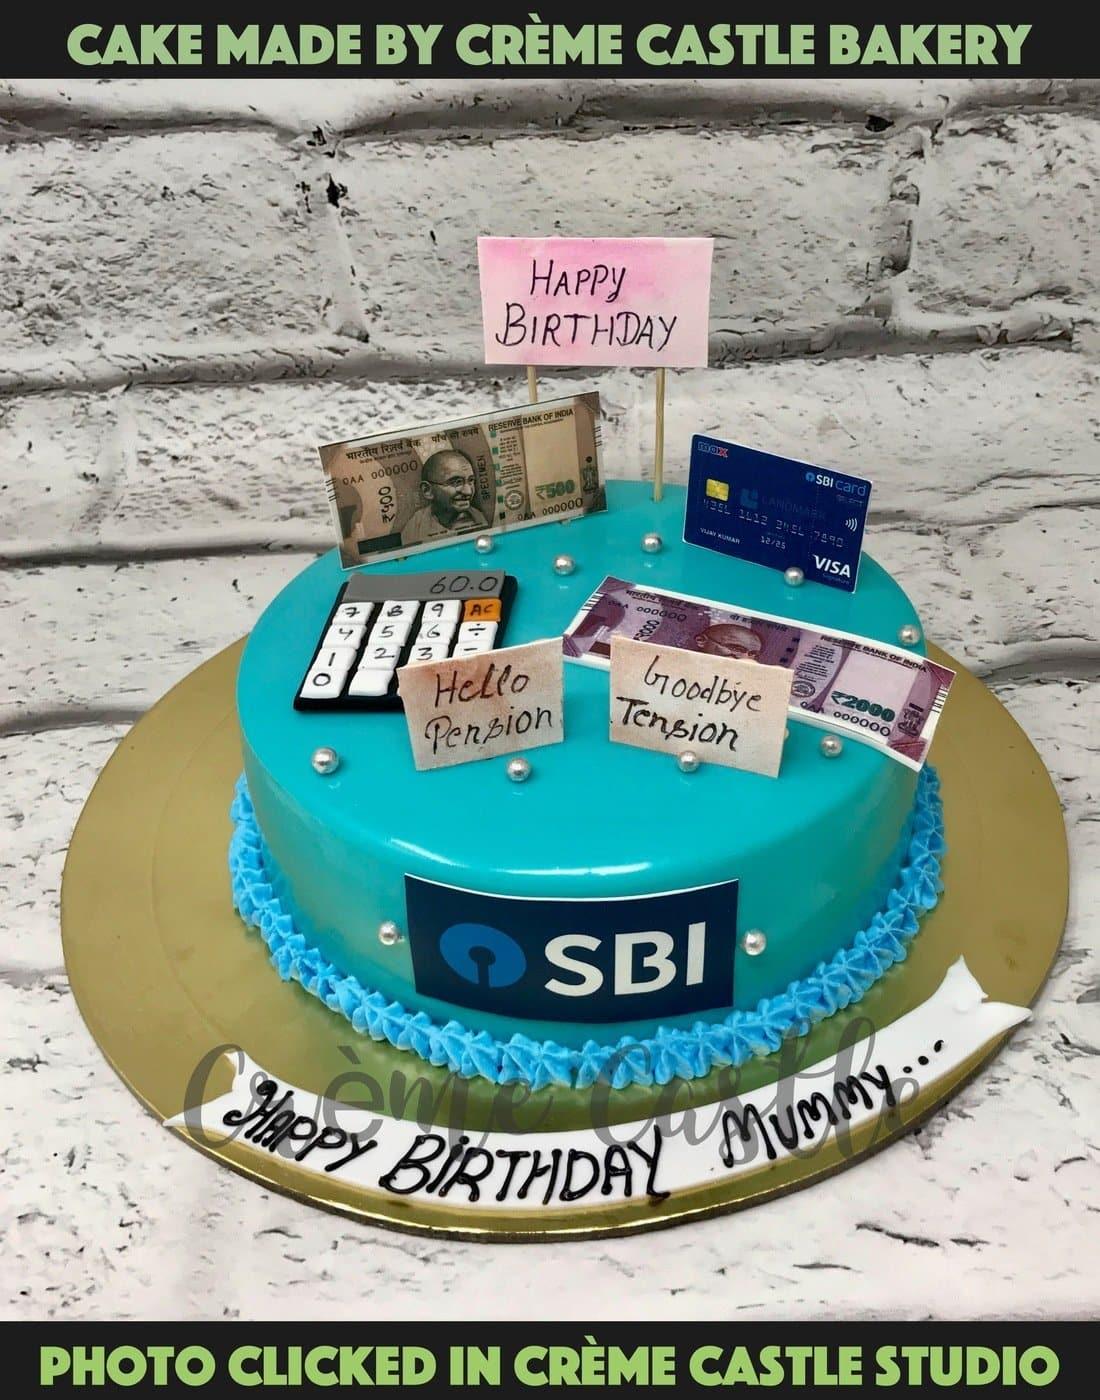 Sei Pâtisserie - Stock exchange cake for a 40th birthday! - - Do contact us  for orders / enquiries / anything in between! Email:  Seipatisserie@gmail.com WhatsApp: 9152 7776 | Facebook